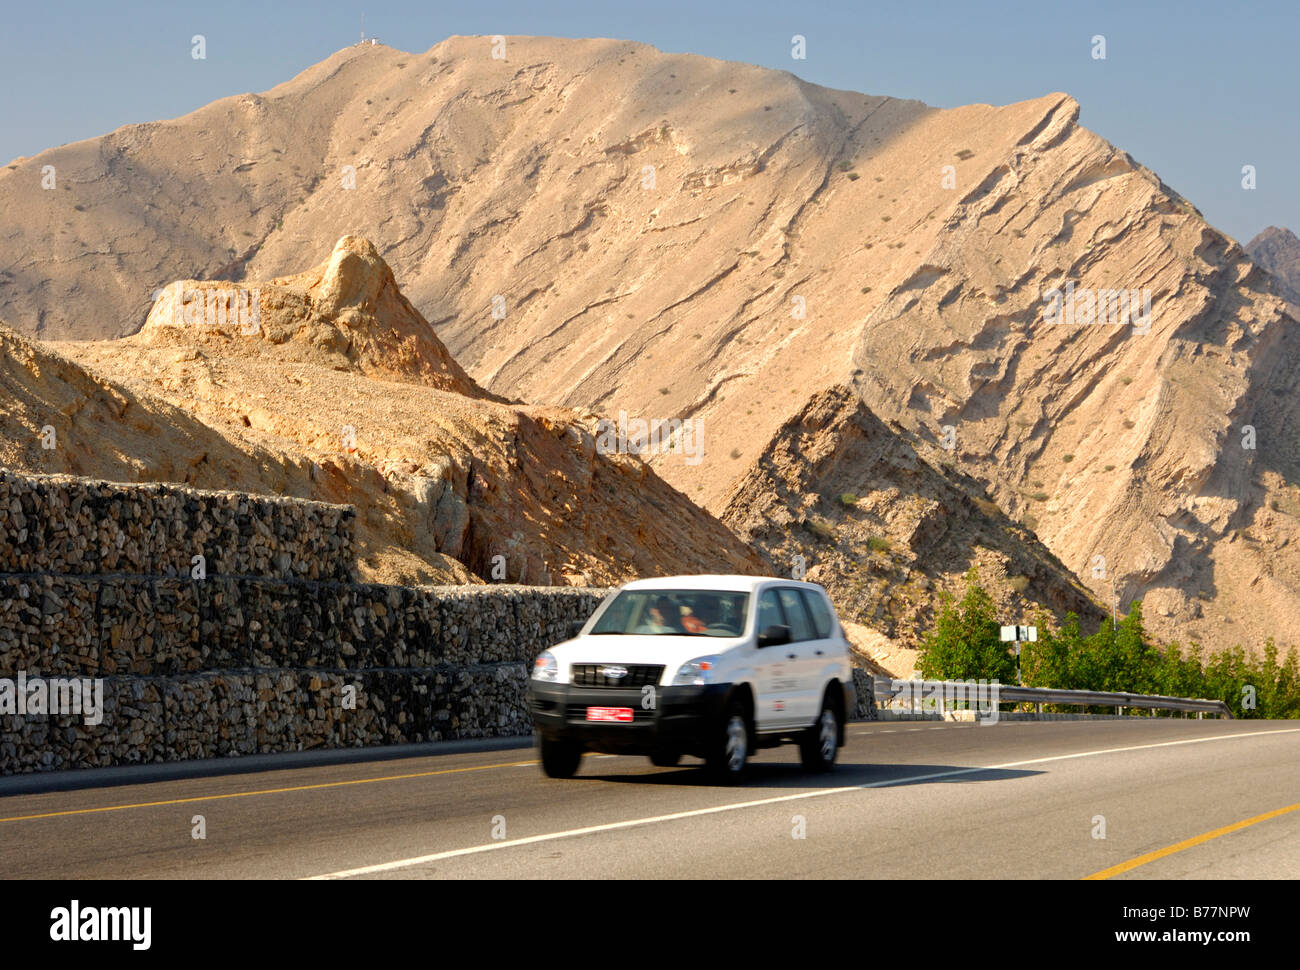 Vehicle, modern street cutting through a sparse mountain landscape, Sultanate of Oman, Middle East Stock Photo